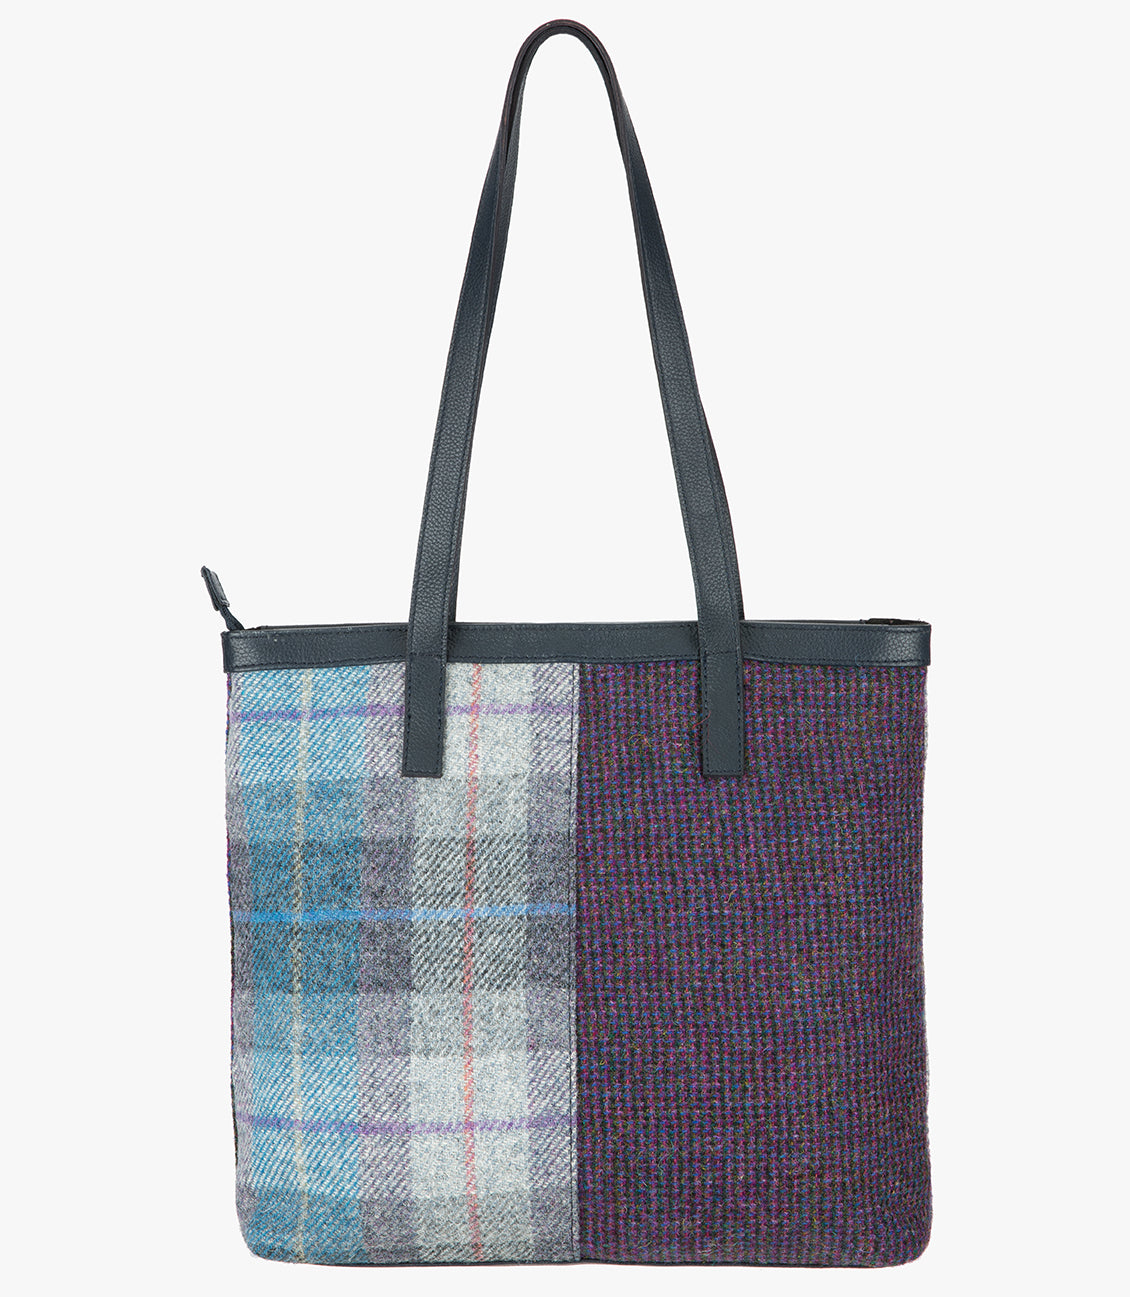 Reverse side of the Harris Tweed shopper with a navy blue leather handle that sits comfortably on the shoulder. It also has a navy blue leather trim around the top of the bag. The bag design is in two halves, the left half is Lavender Harris Tweed, which is lilac, grey, and blue check. The right side is a subtle purple and black check.